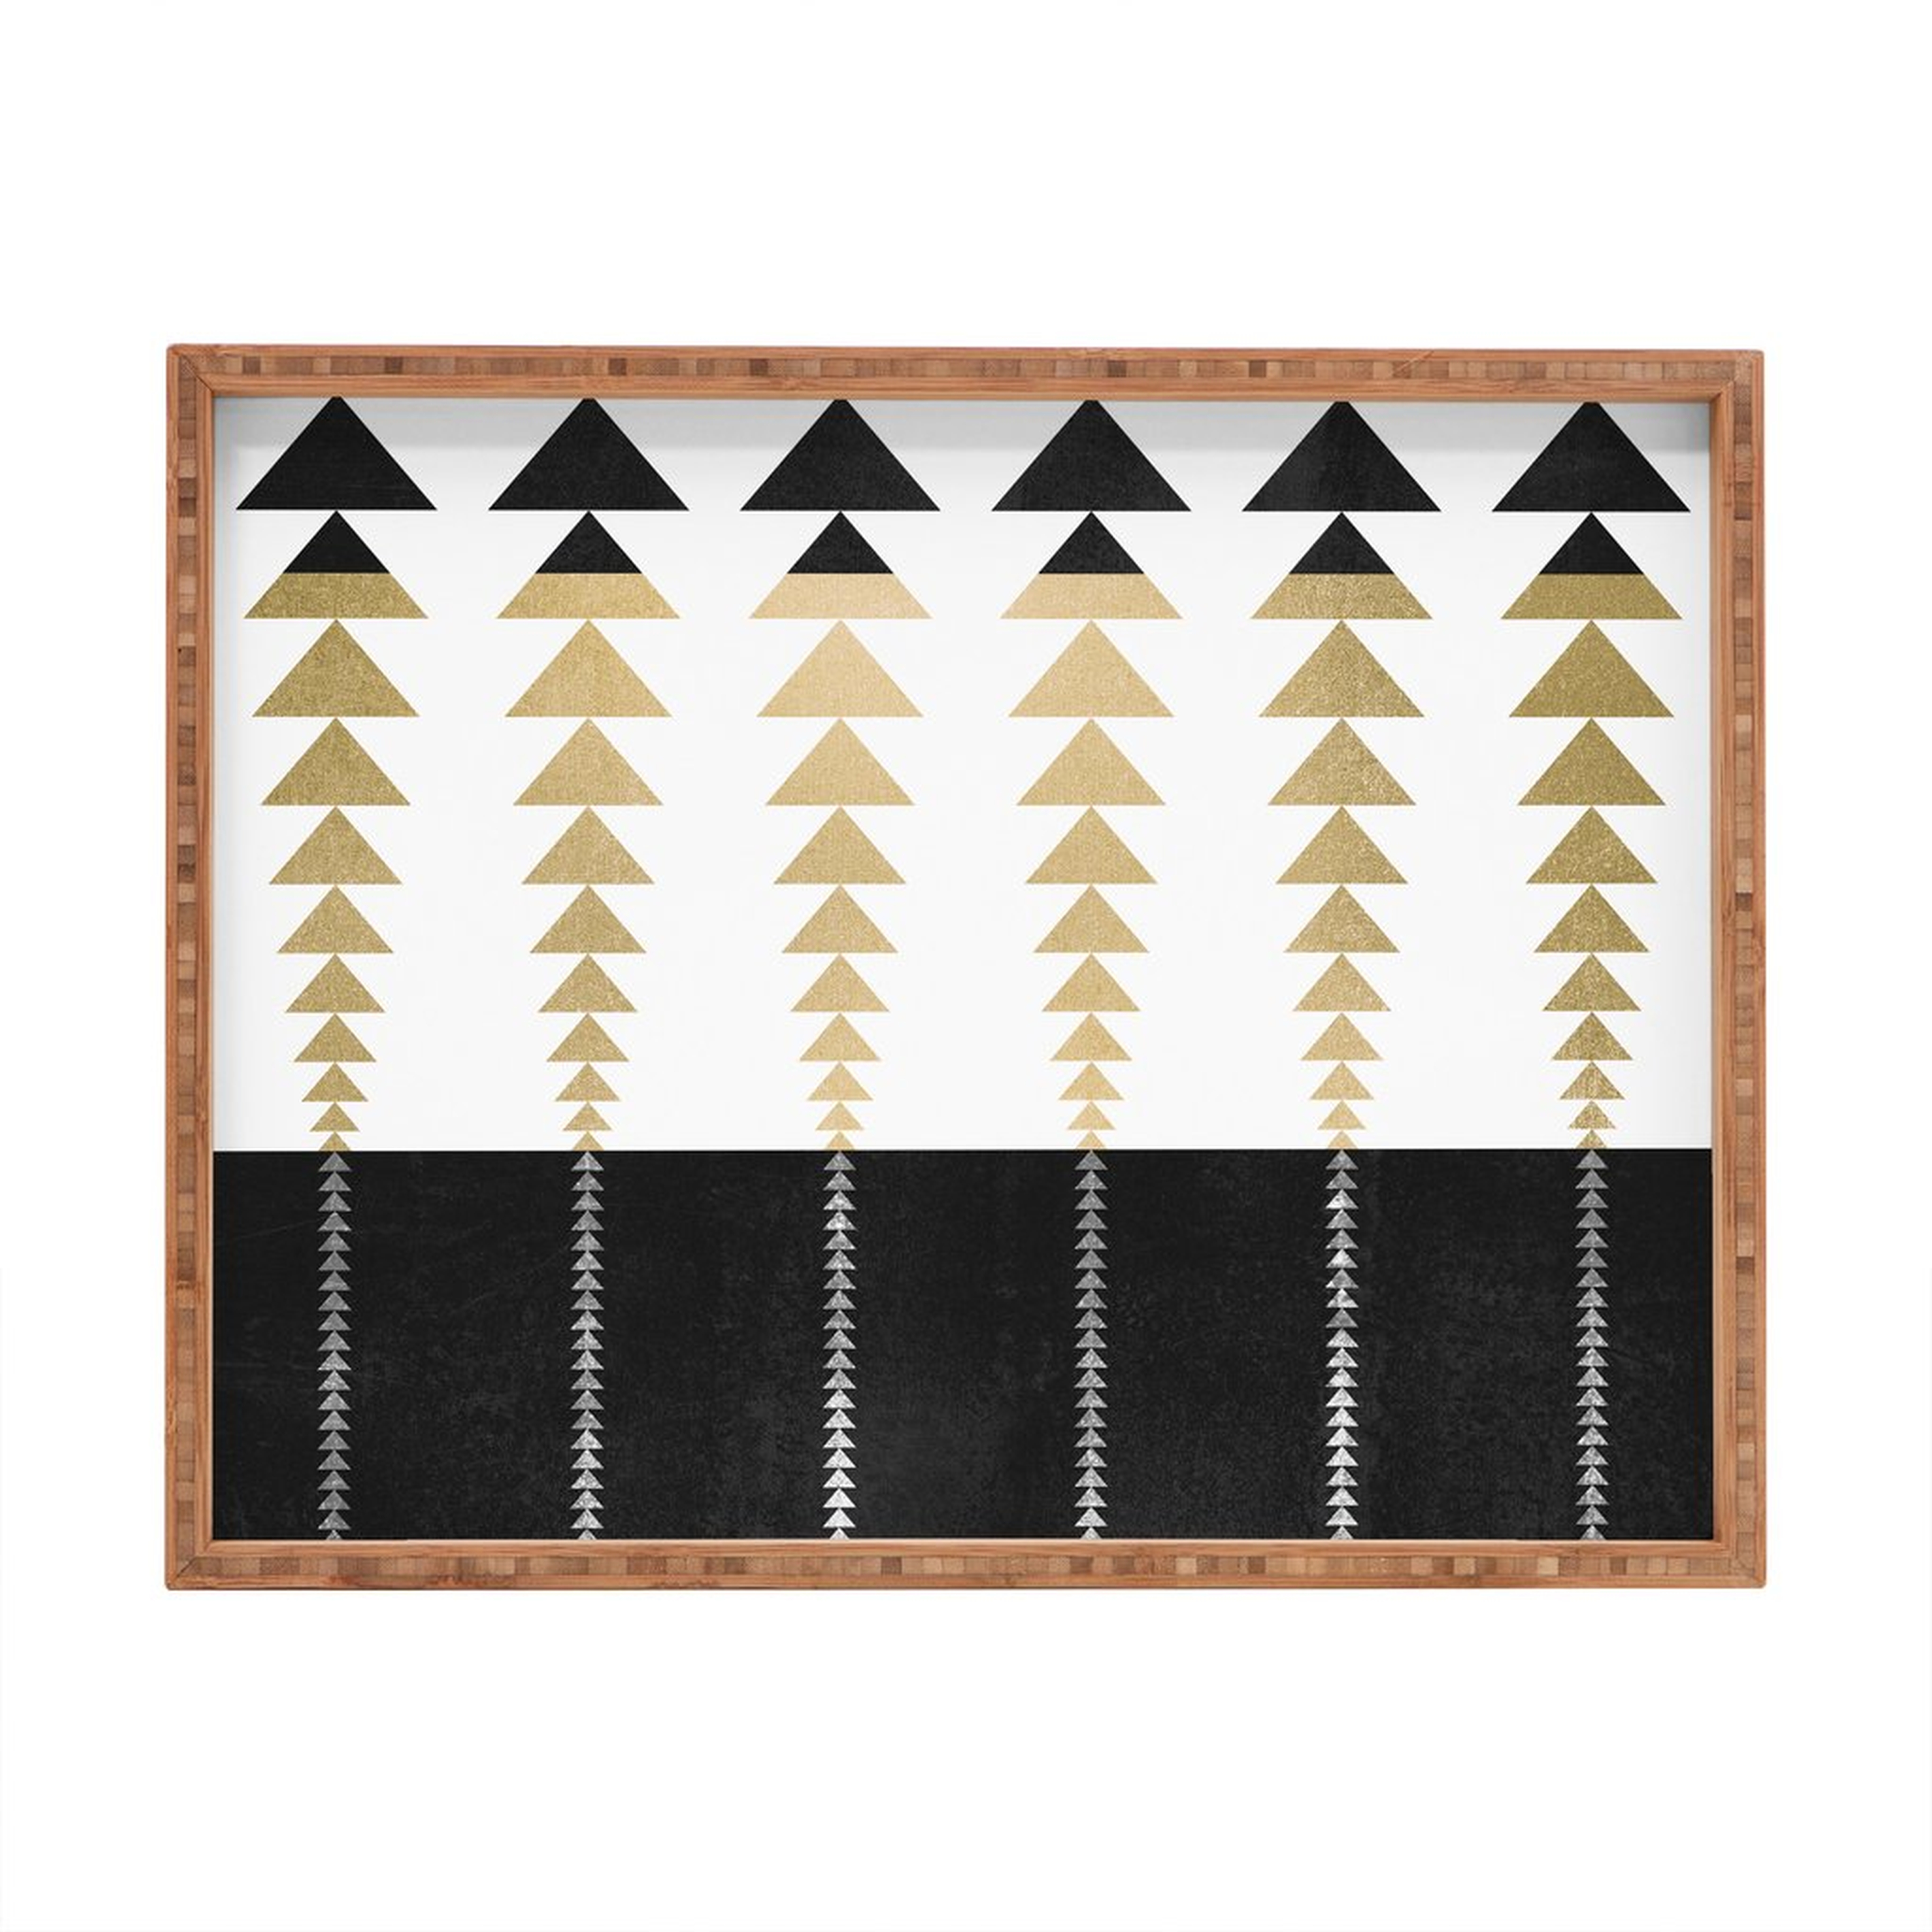 Triangles in gold Rectangular Tray - XLarge - Wander Print Co.